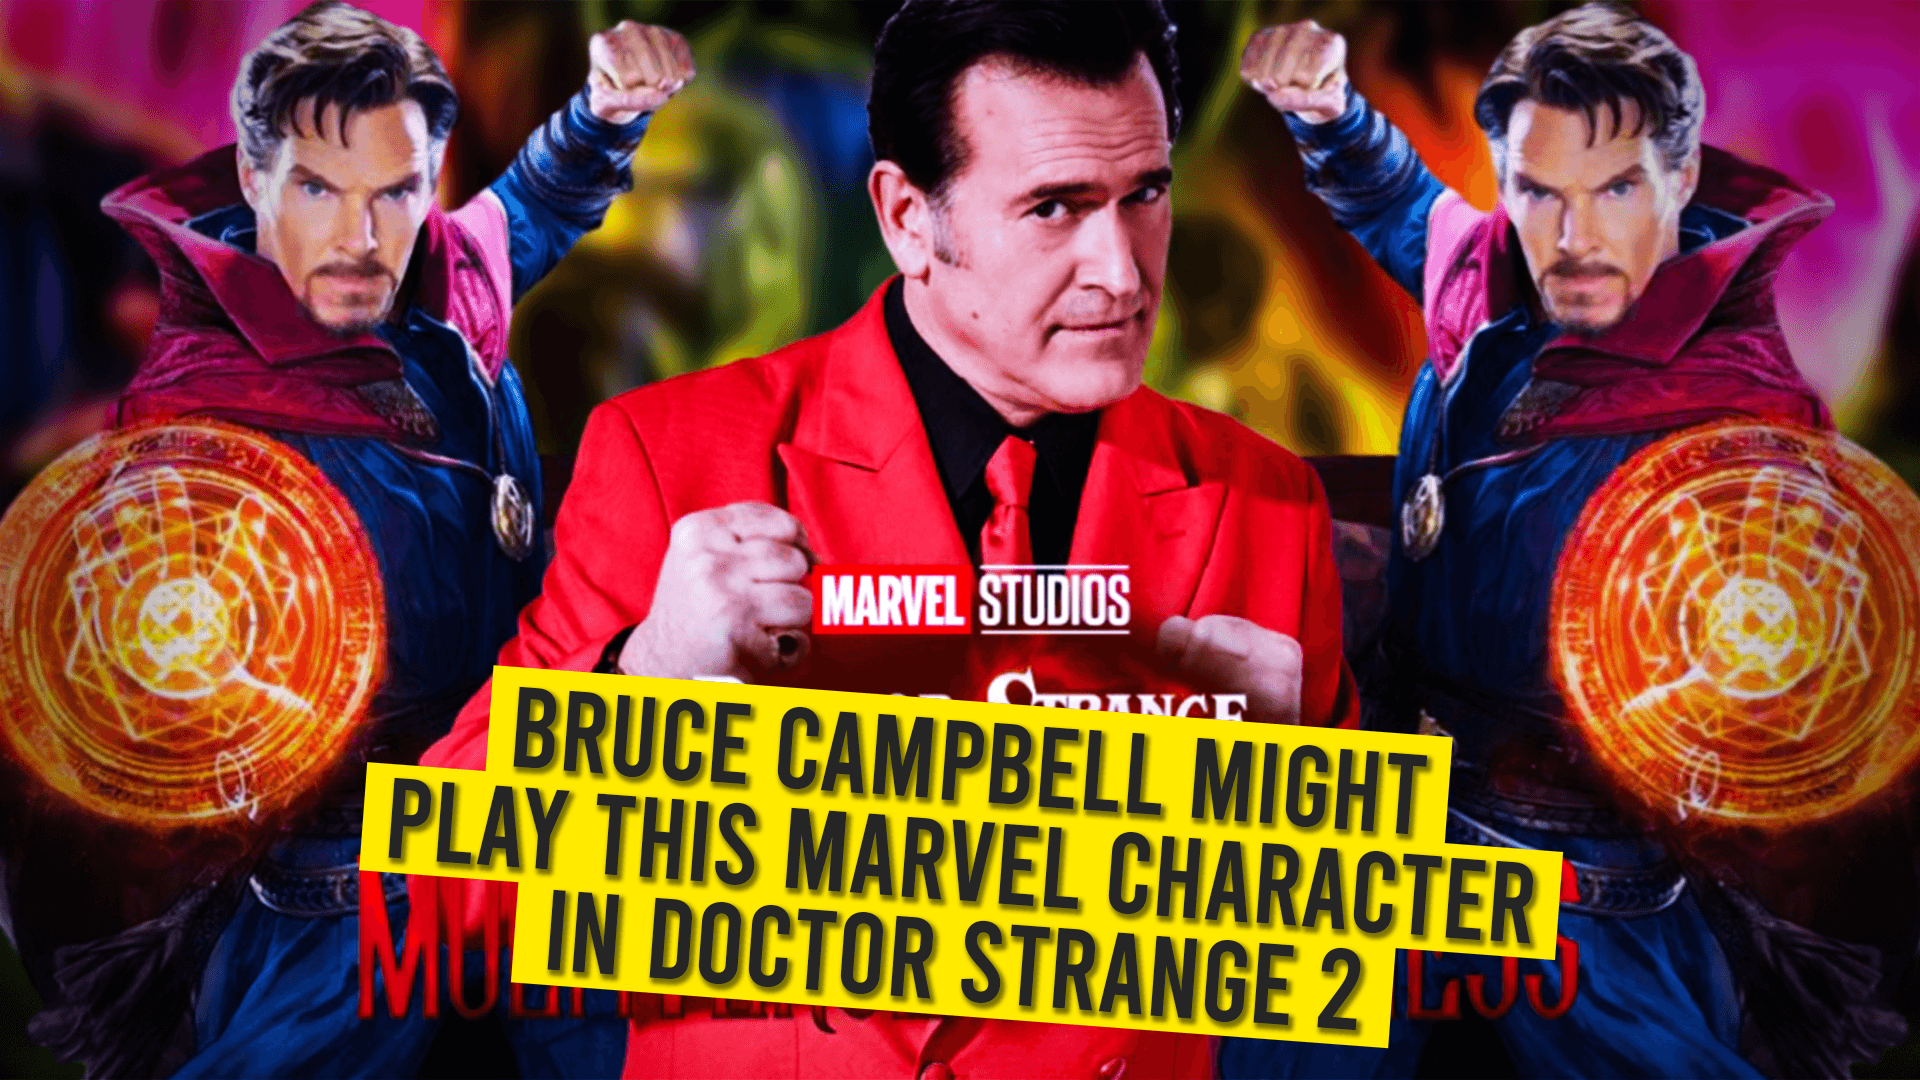 Bruce Campbell Might Play This Marvel Character In Doctor Strange 2